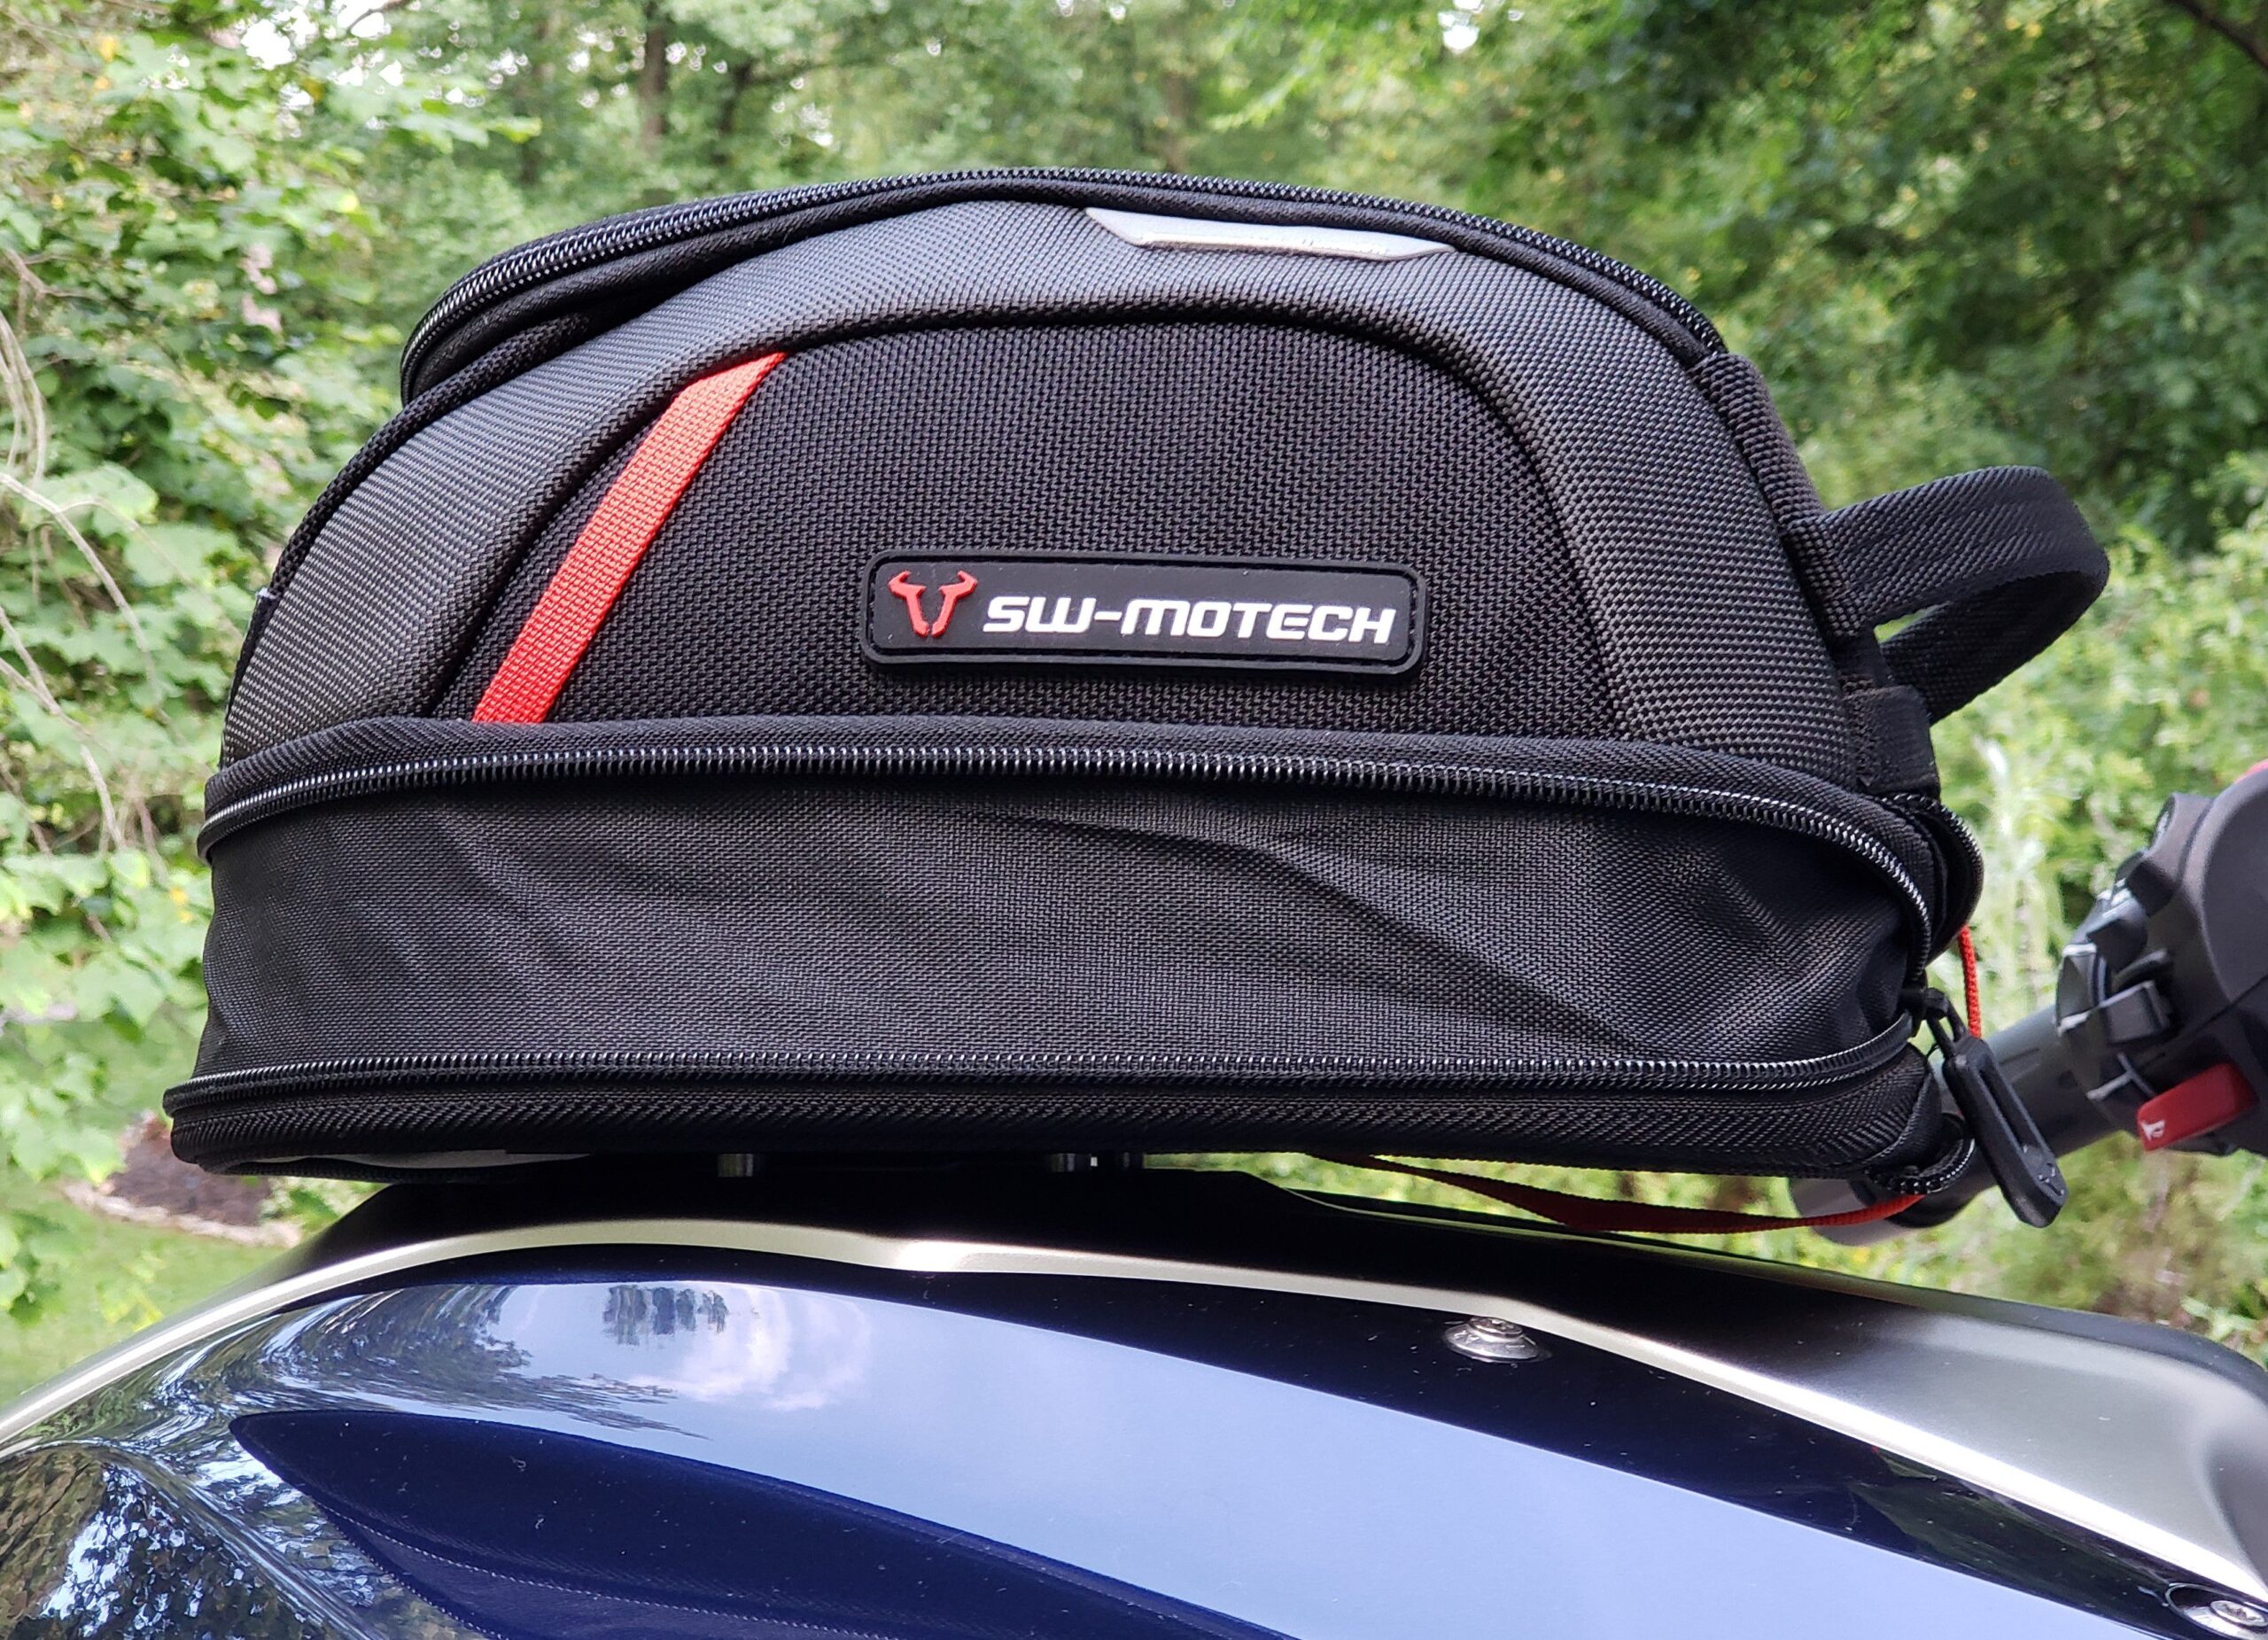 SW-Motech Evo Engage Tank Bag - Installation and Review - YouTube